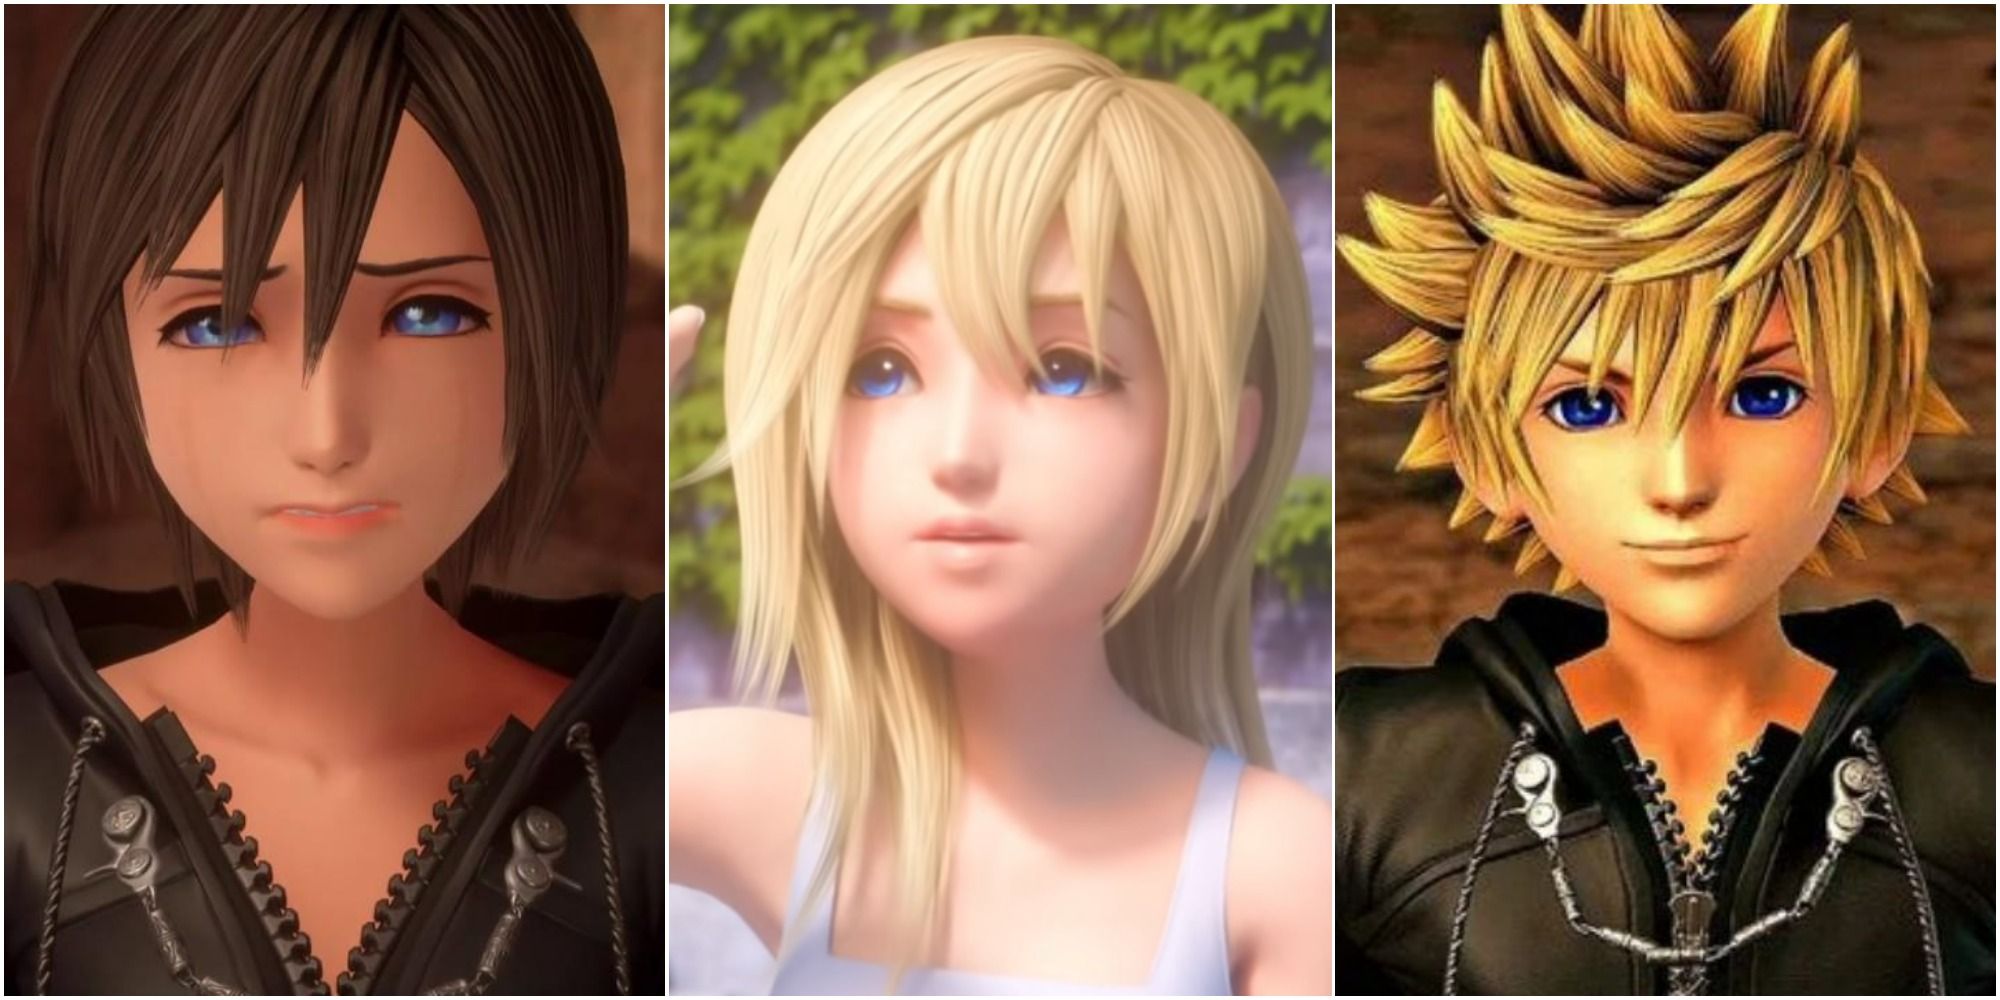 Xion, Namine, and Roxas in KH3